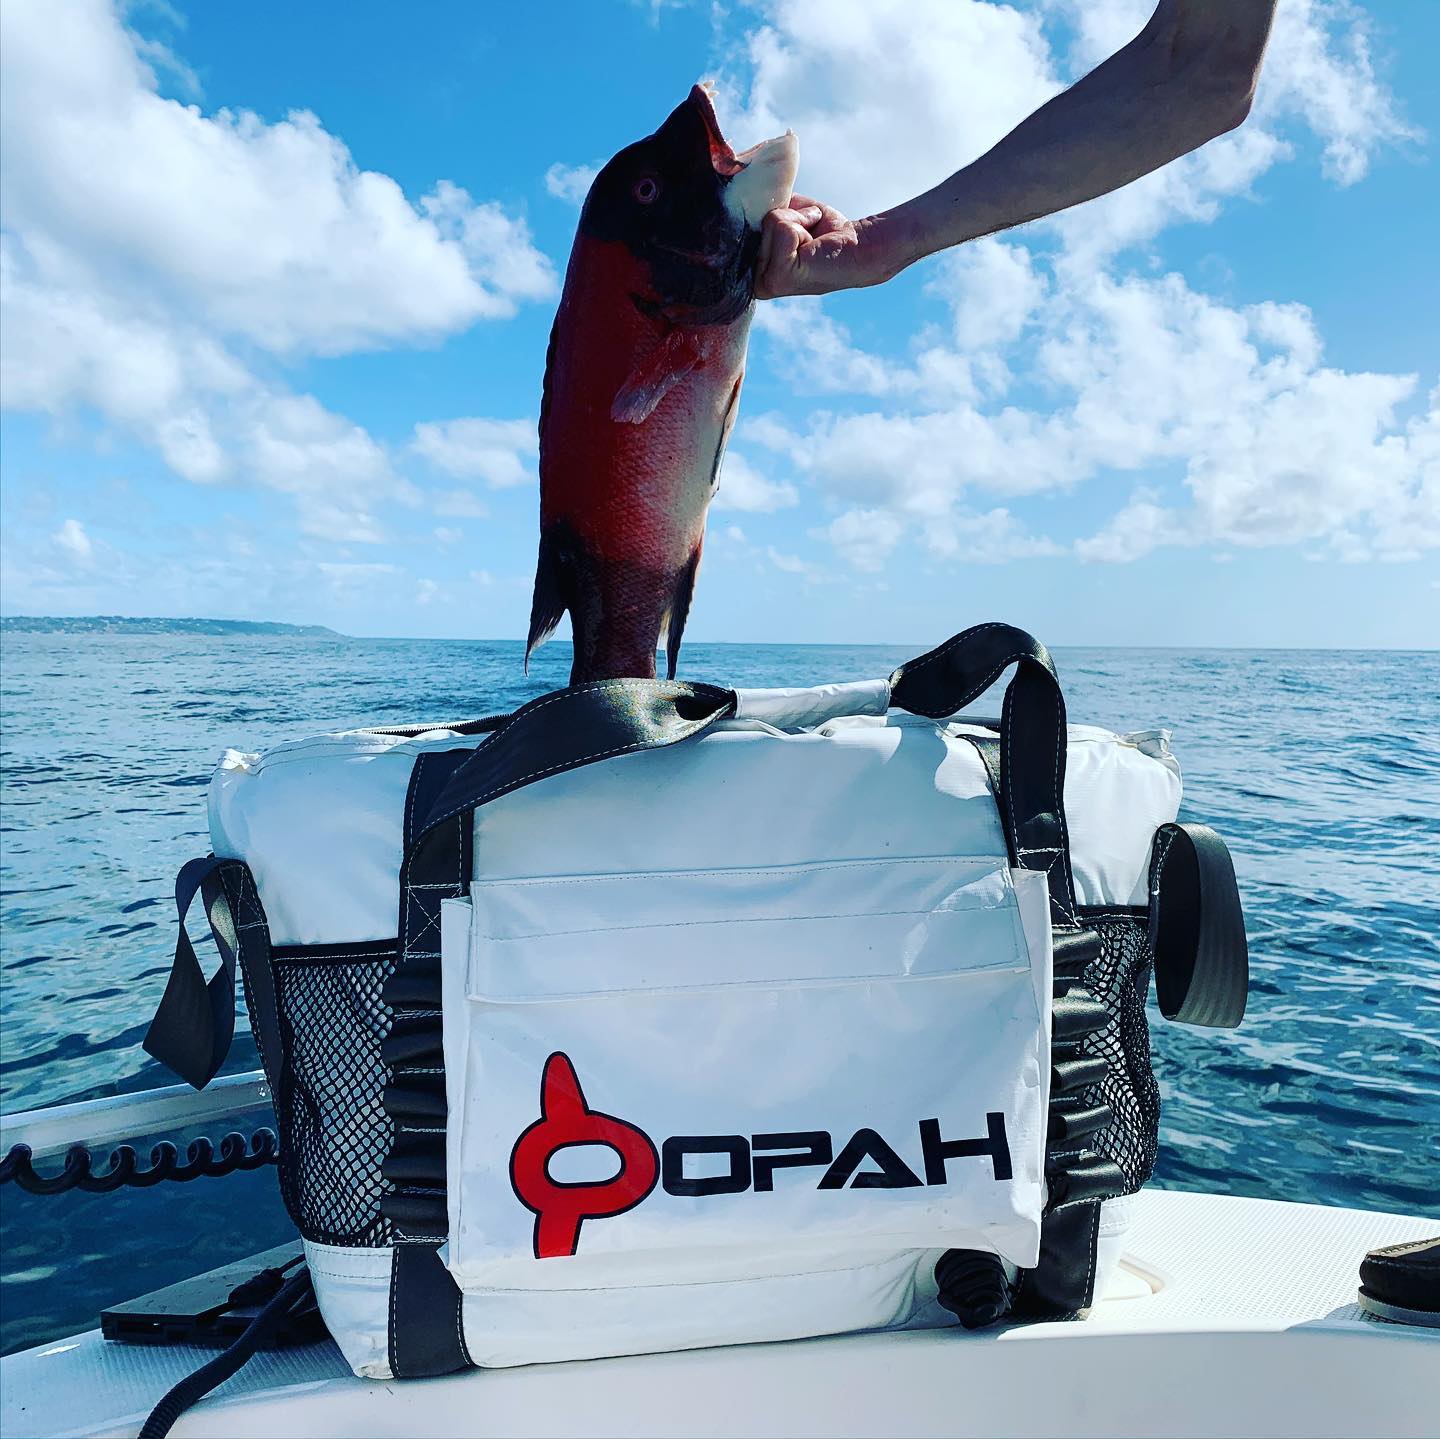 Opah Gear Fathom 3 Fish Cooler Bag Kill Bag. Protect your catch longer. The most reliable fish bag on the market. Purposely built to be the highest quality fish cooler bag in sportfishing. Even great when used as an insulated cooler bag while out camping or for other normal use. The highest quality insulated bag. A perfect Tuna Kill Bag, Dorado Kill bag, or yellowtail kill bag. 